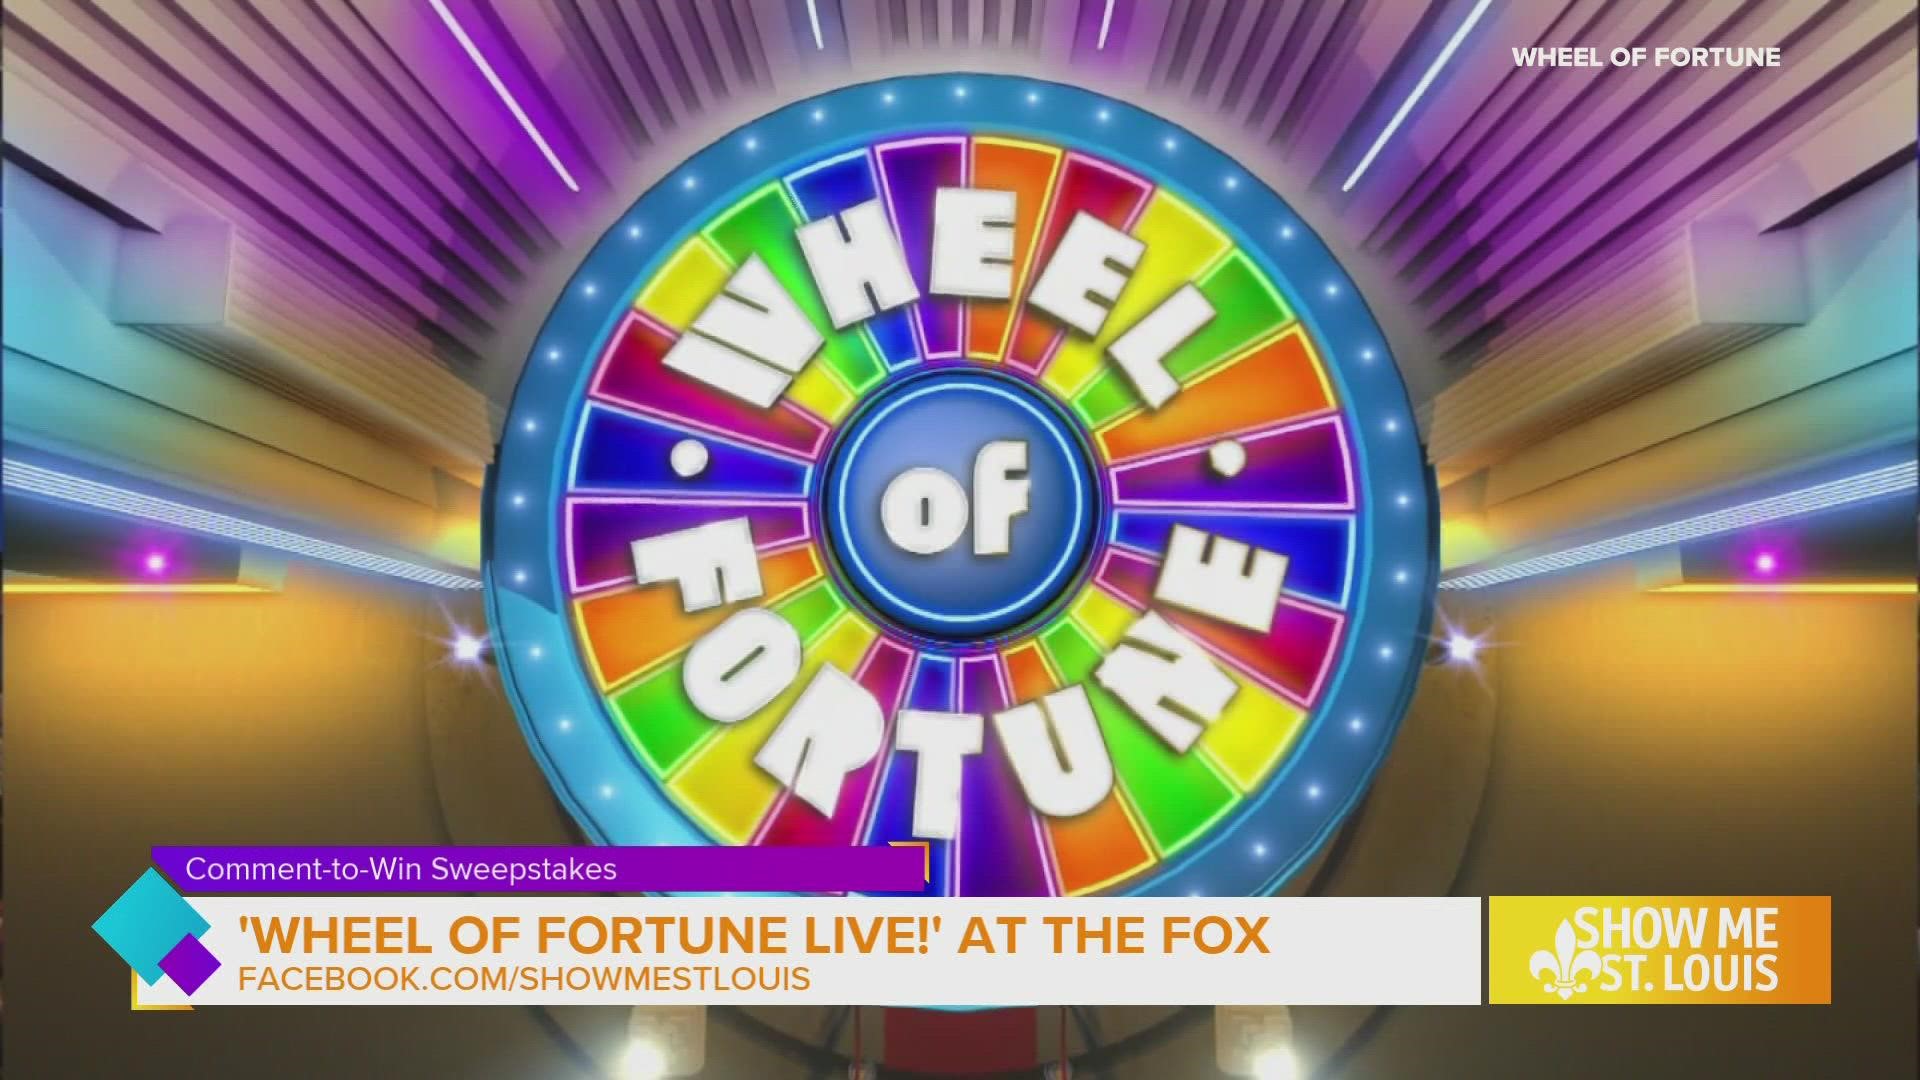 Five (5) winners will receive a pair of tickets to 'Wheel of Fortune Live!' at the Fabulous Fox on September 9.